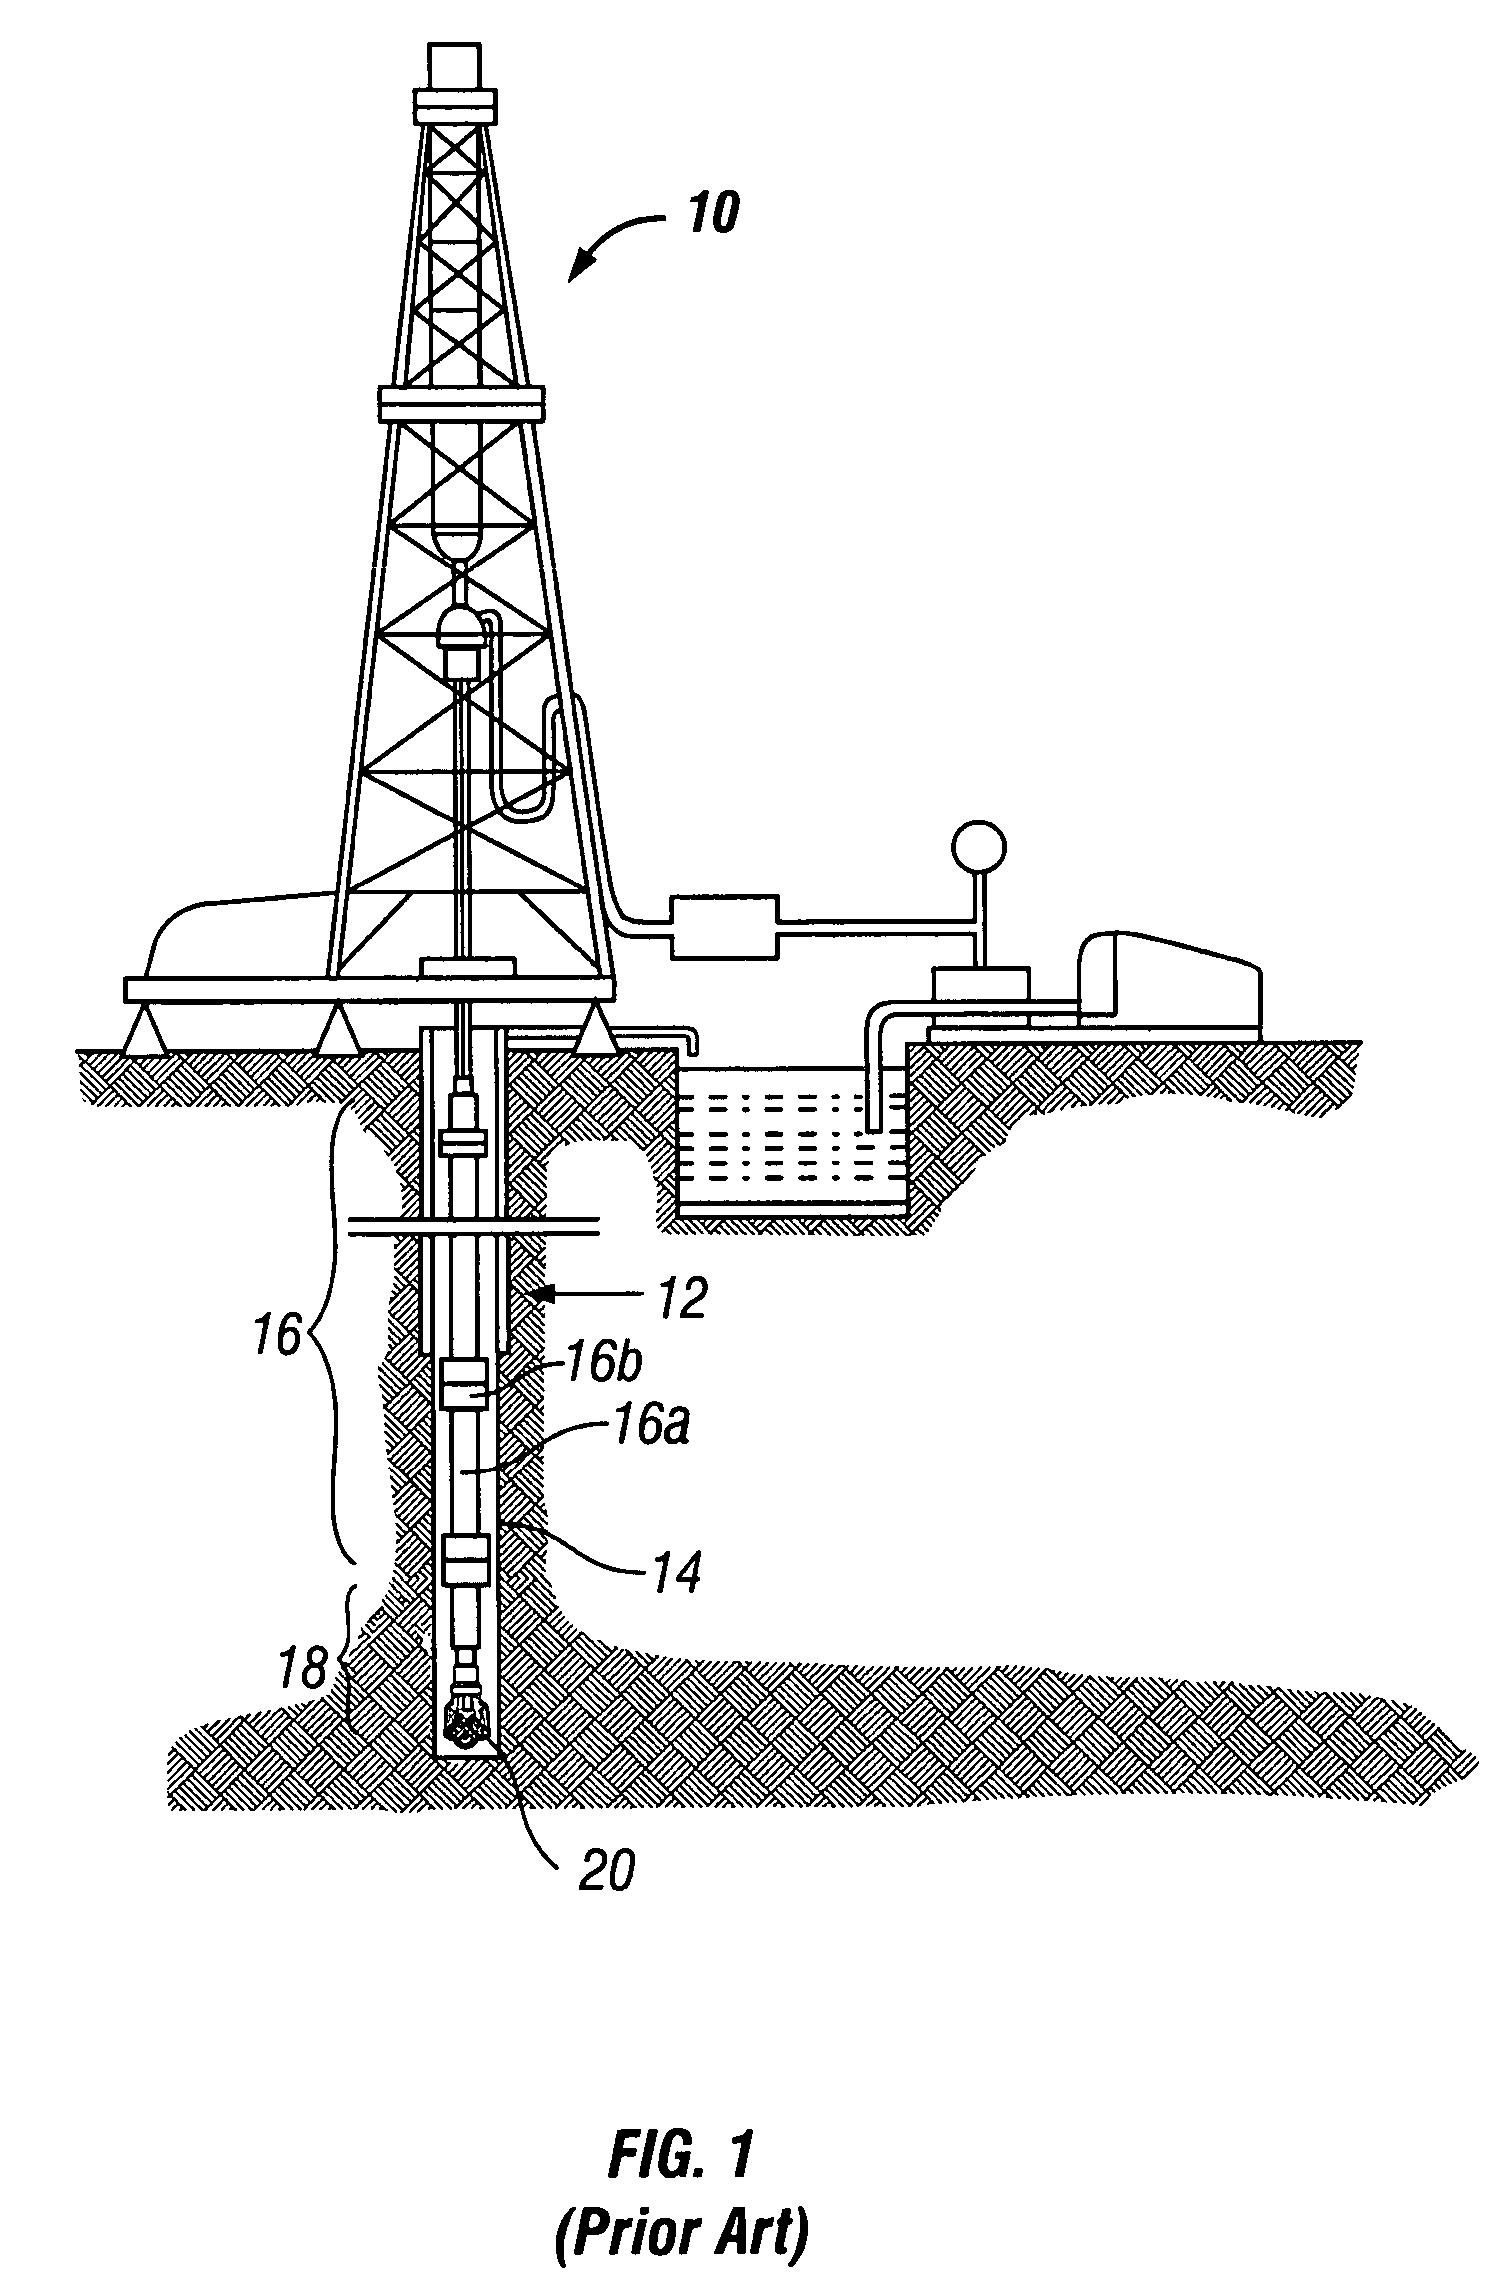 Methods for evaluating and improving drilling operations